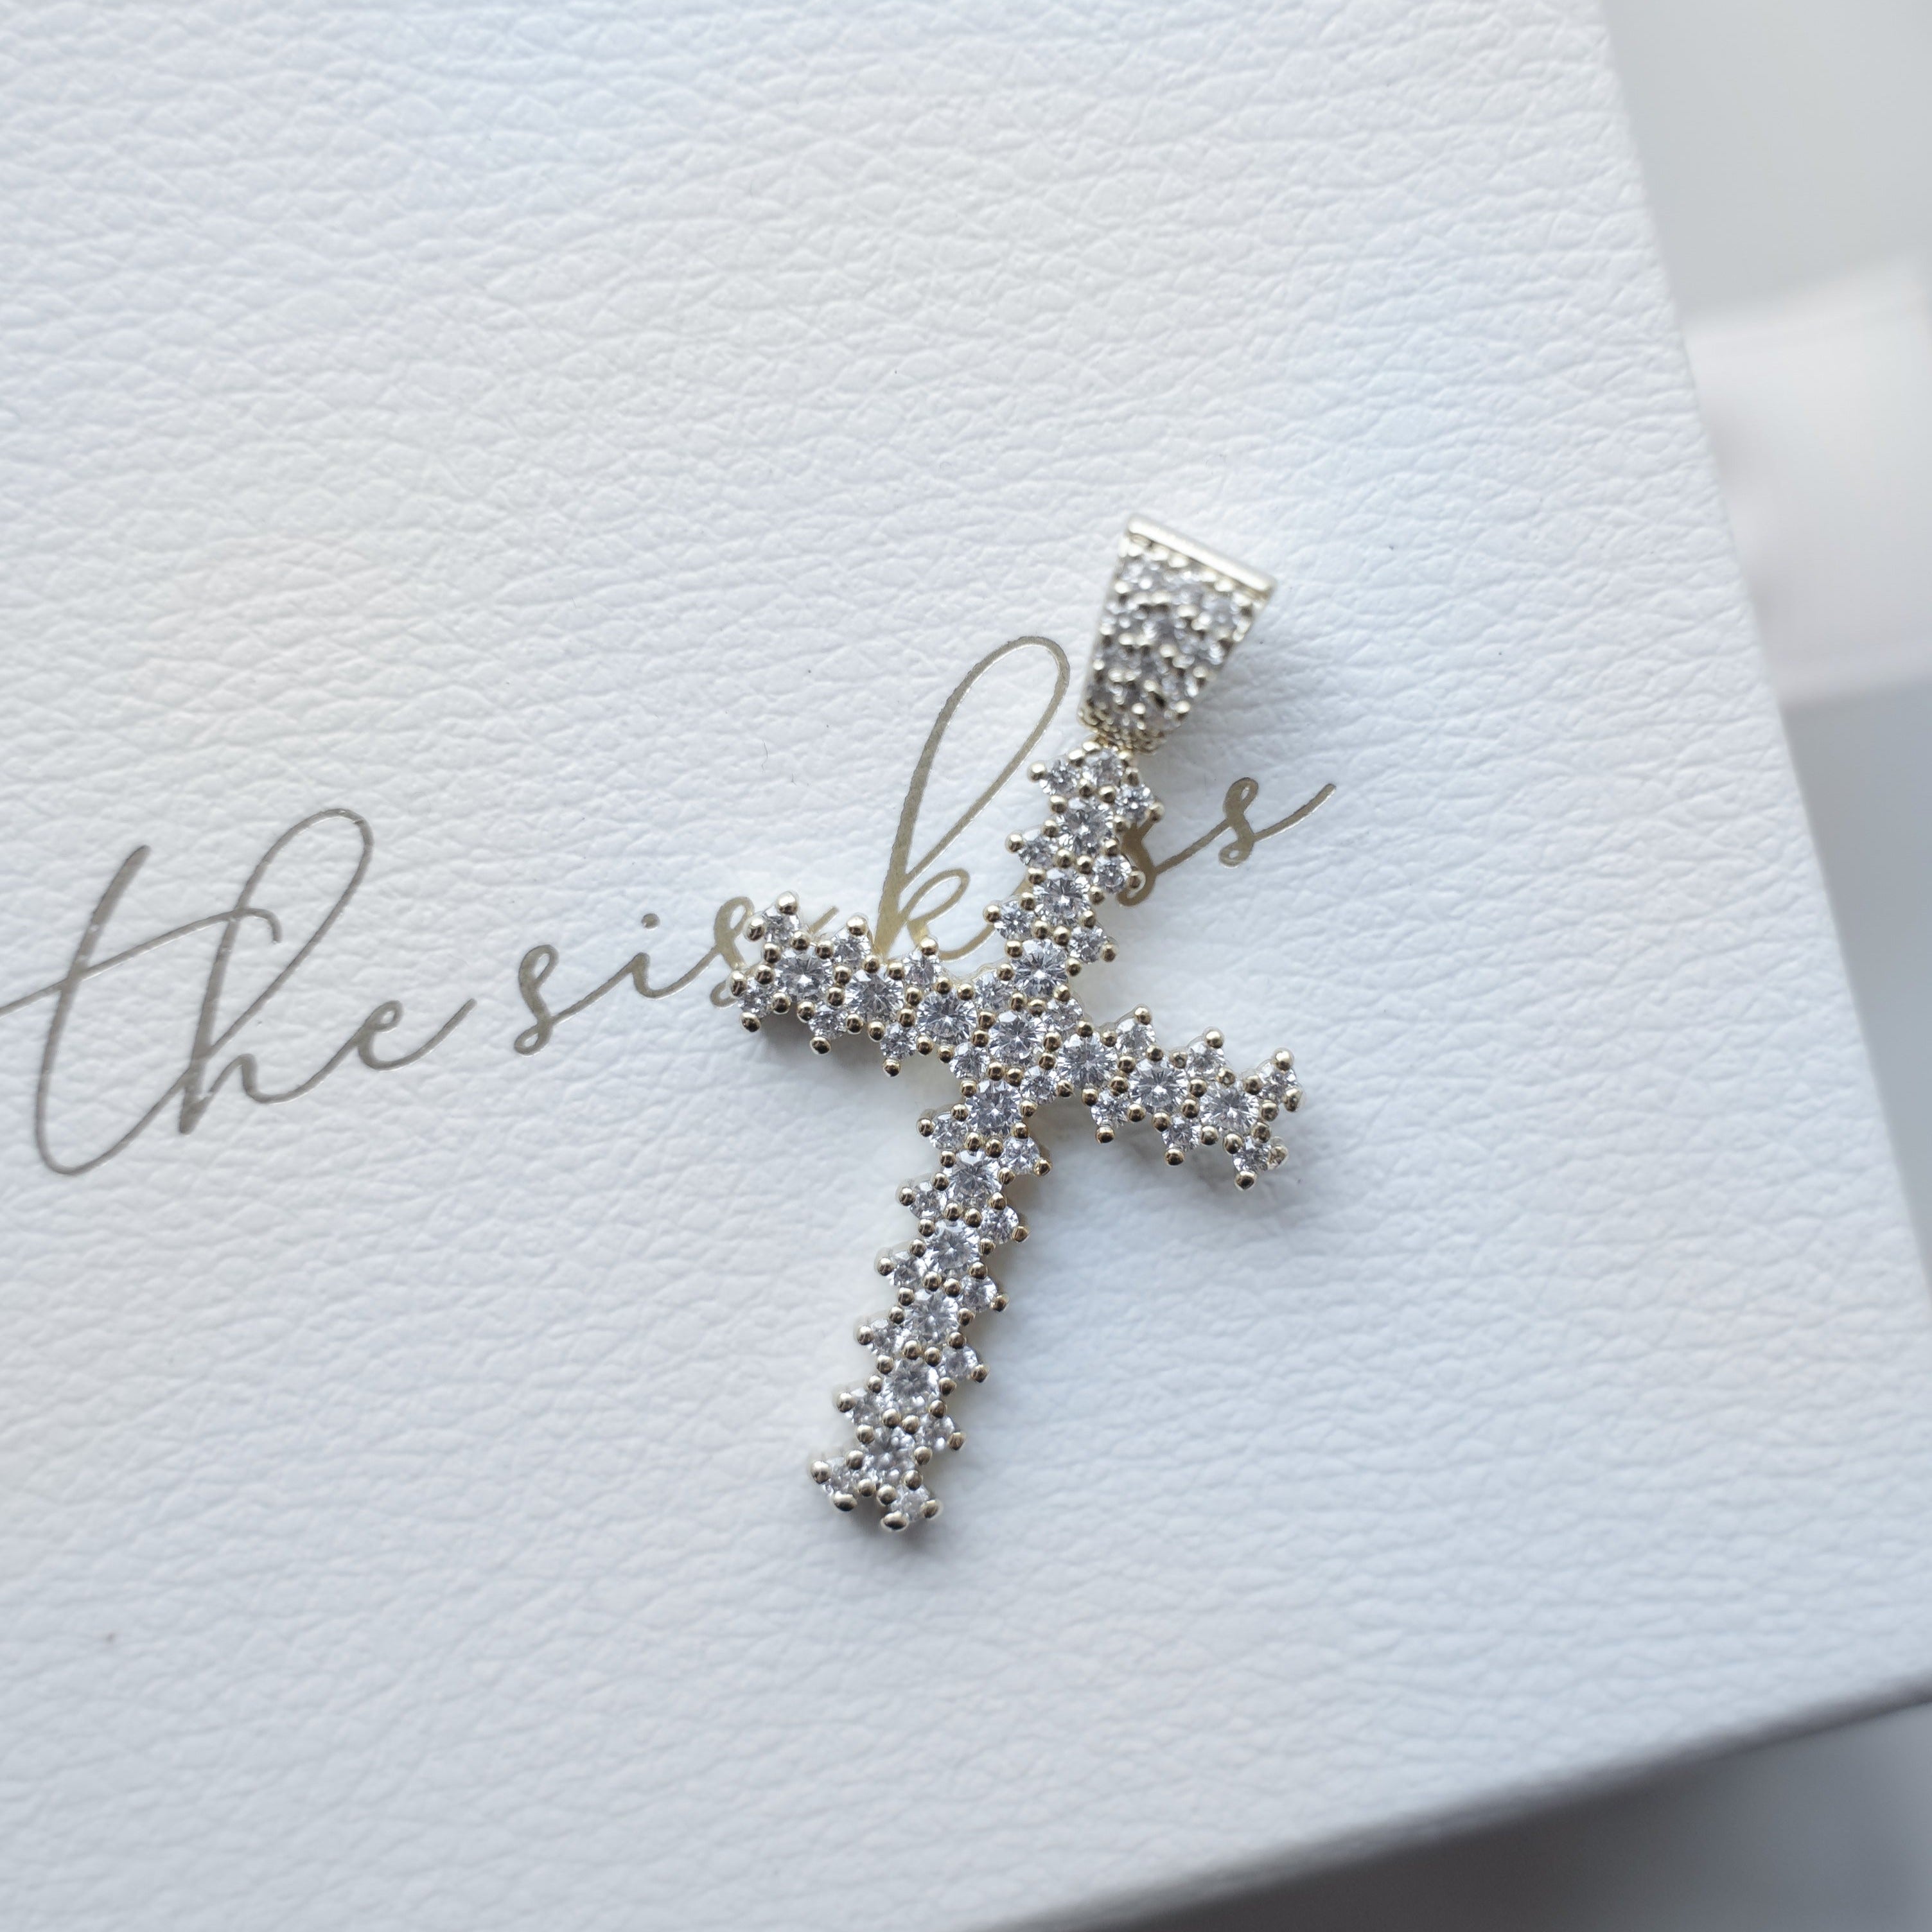 Crystal Cross Necklace Women's | Isaiah 46:6